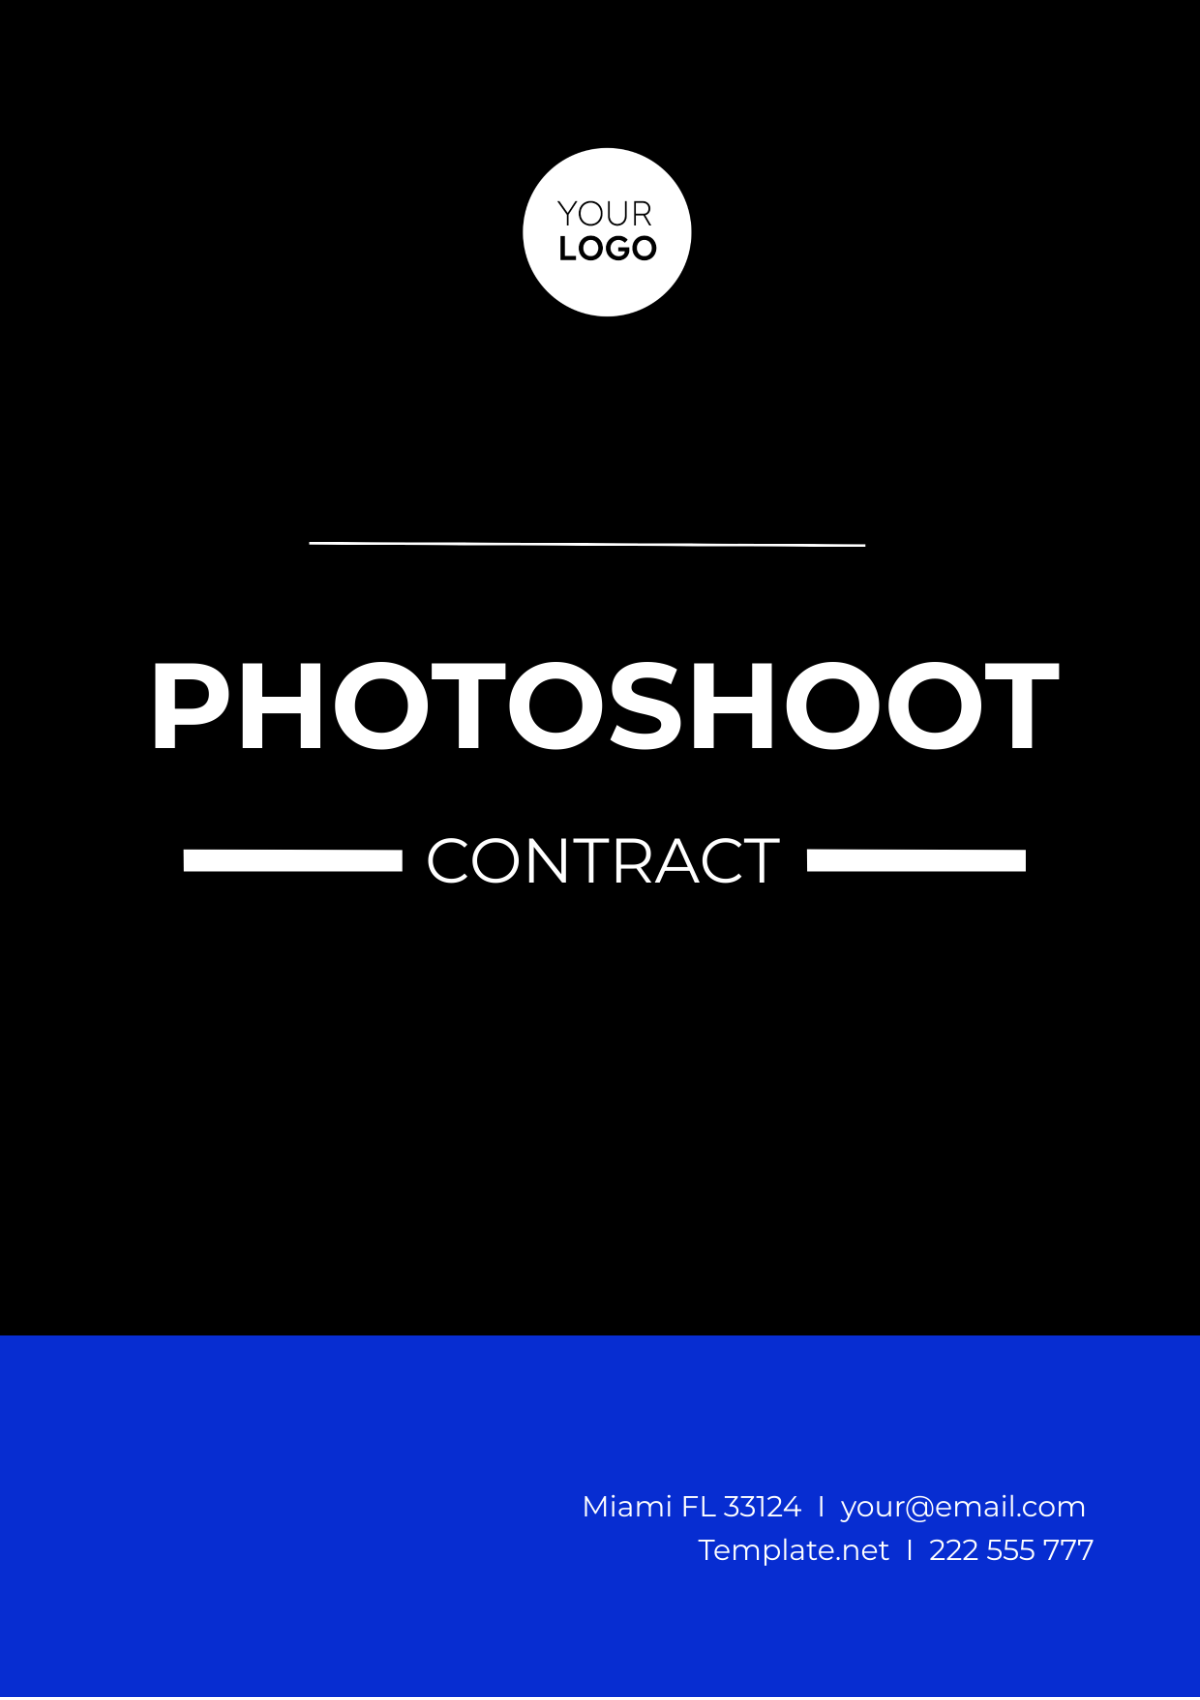 Photoshoot Contract Template